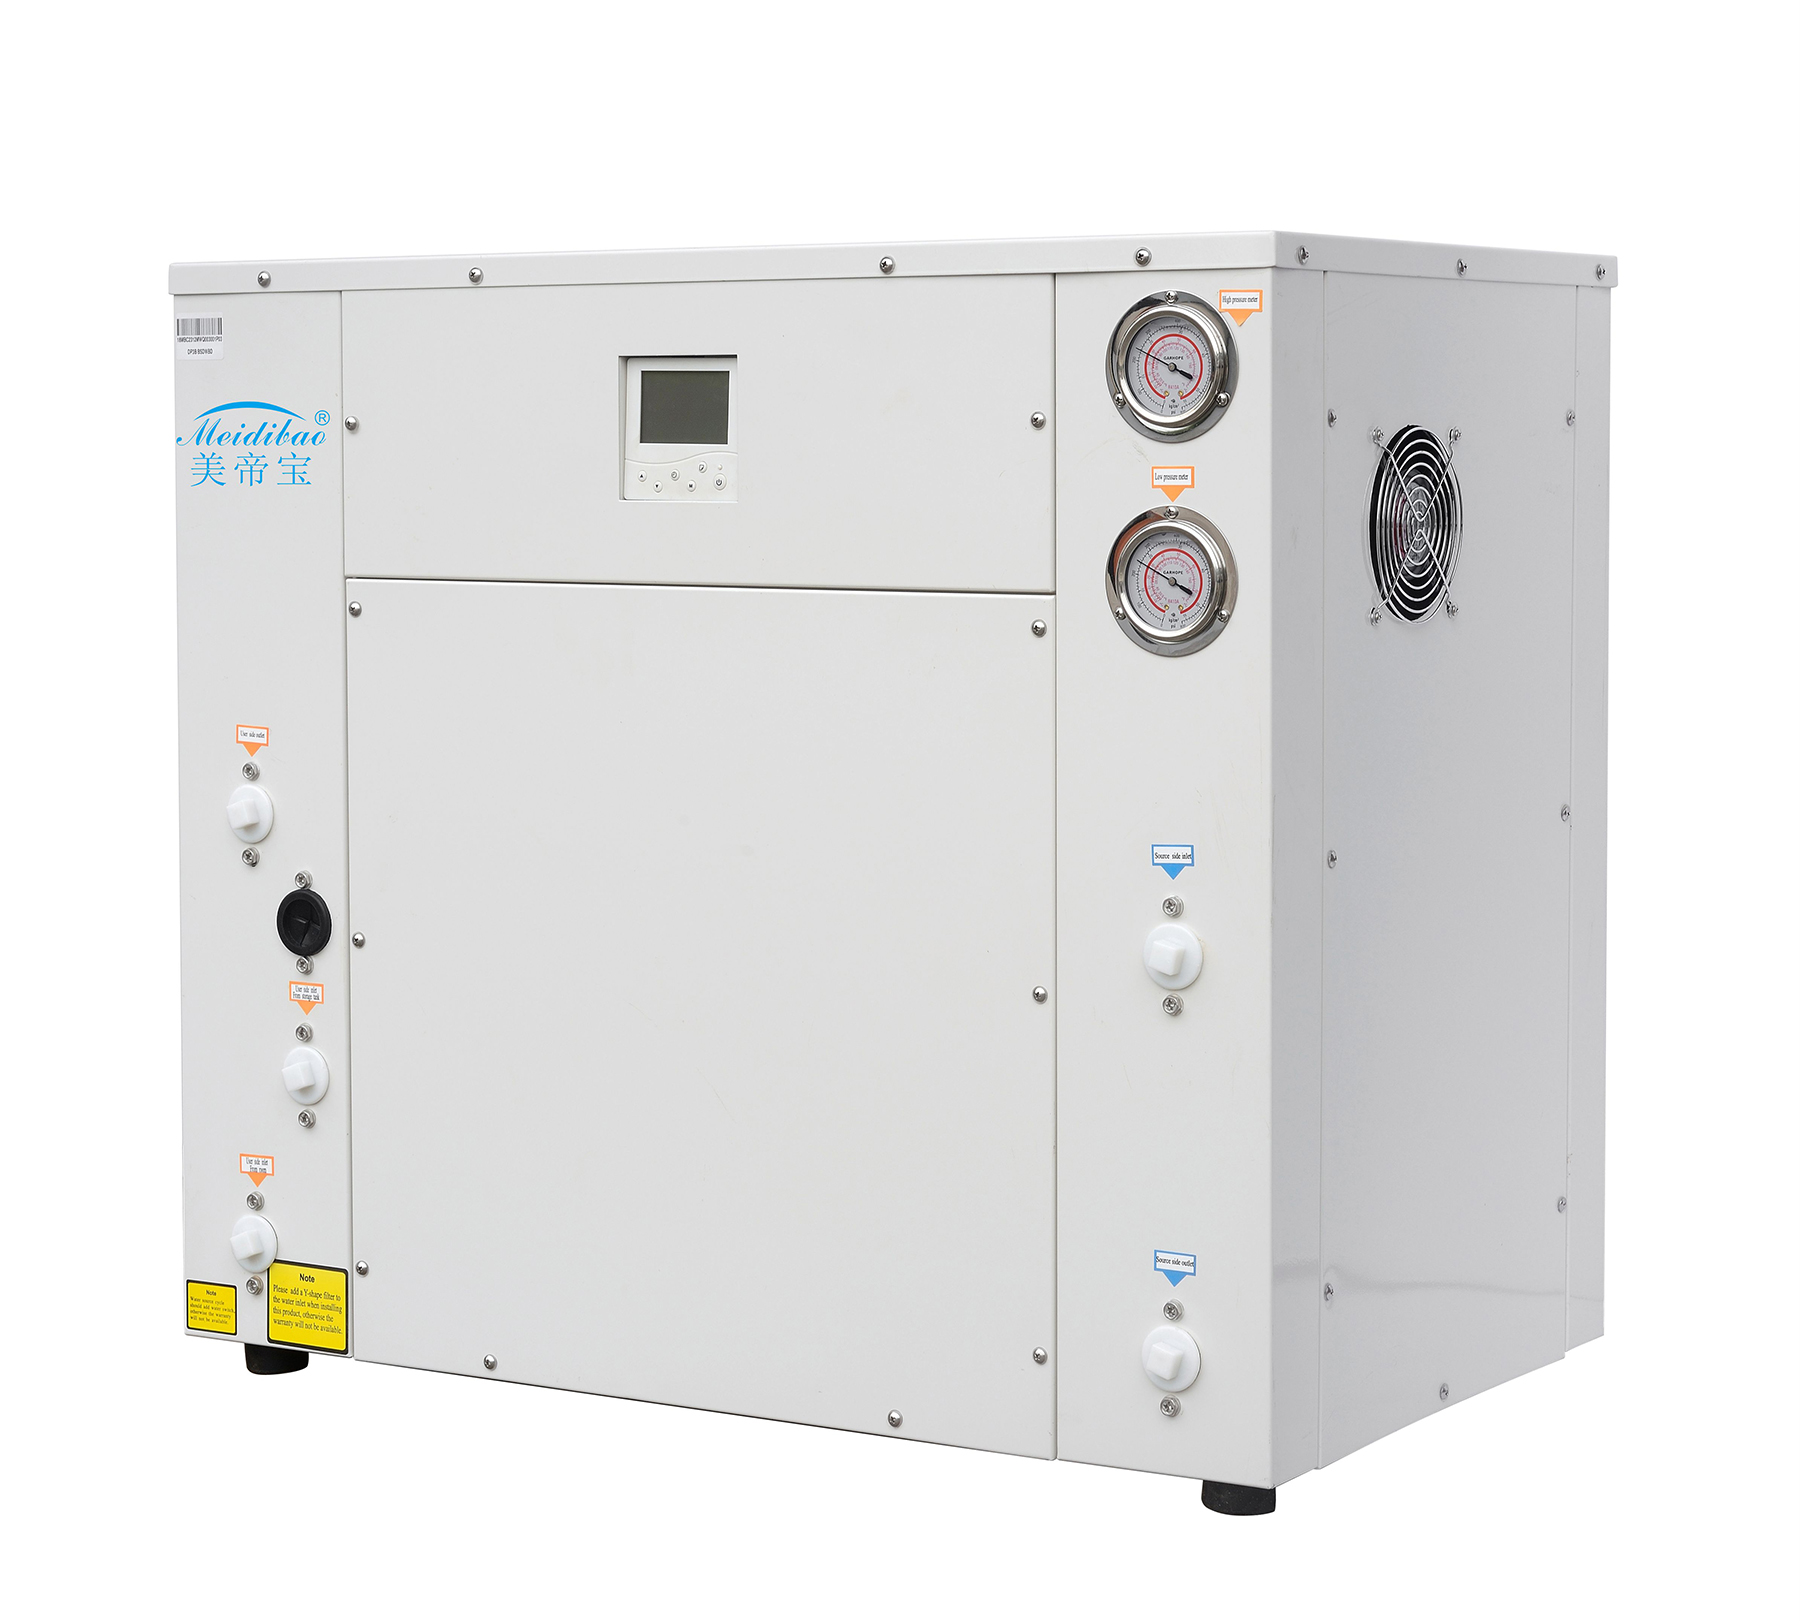 Reversible 100 Kw Ground Source Heat Pump for Hot Water